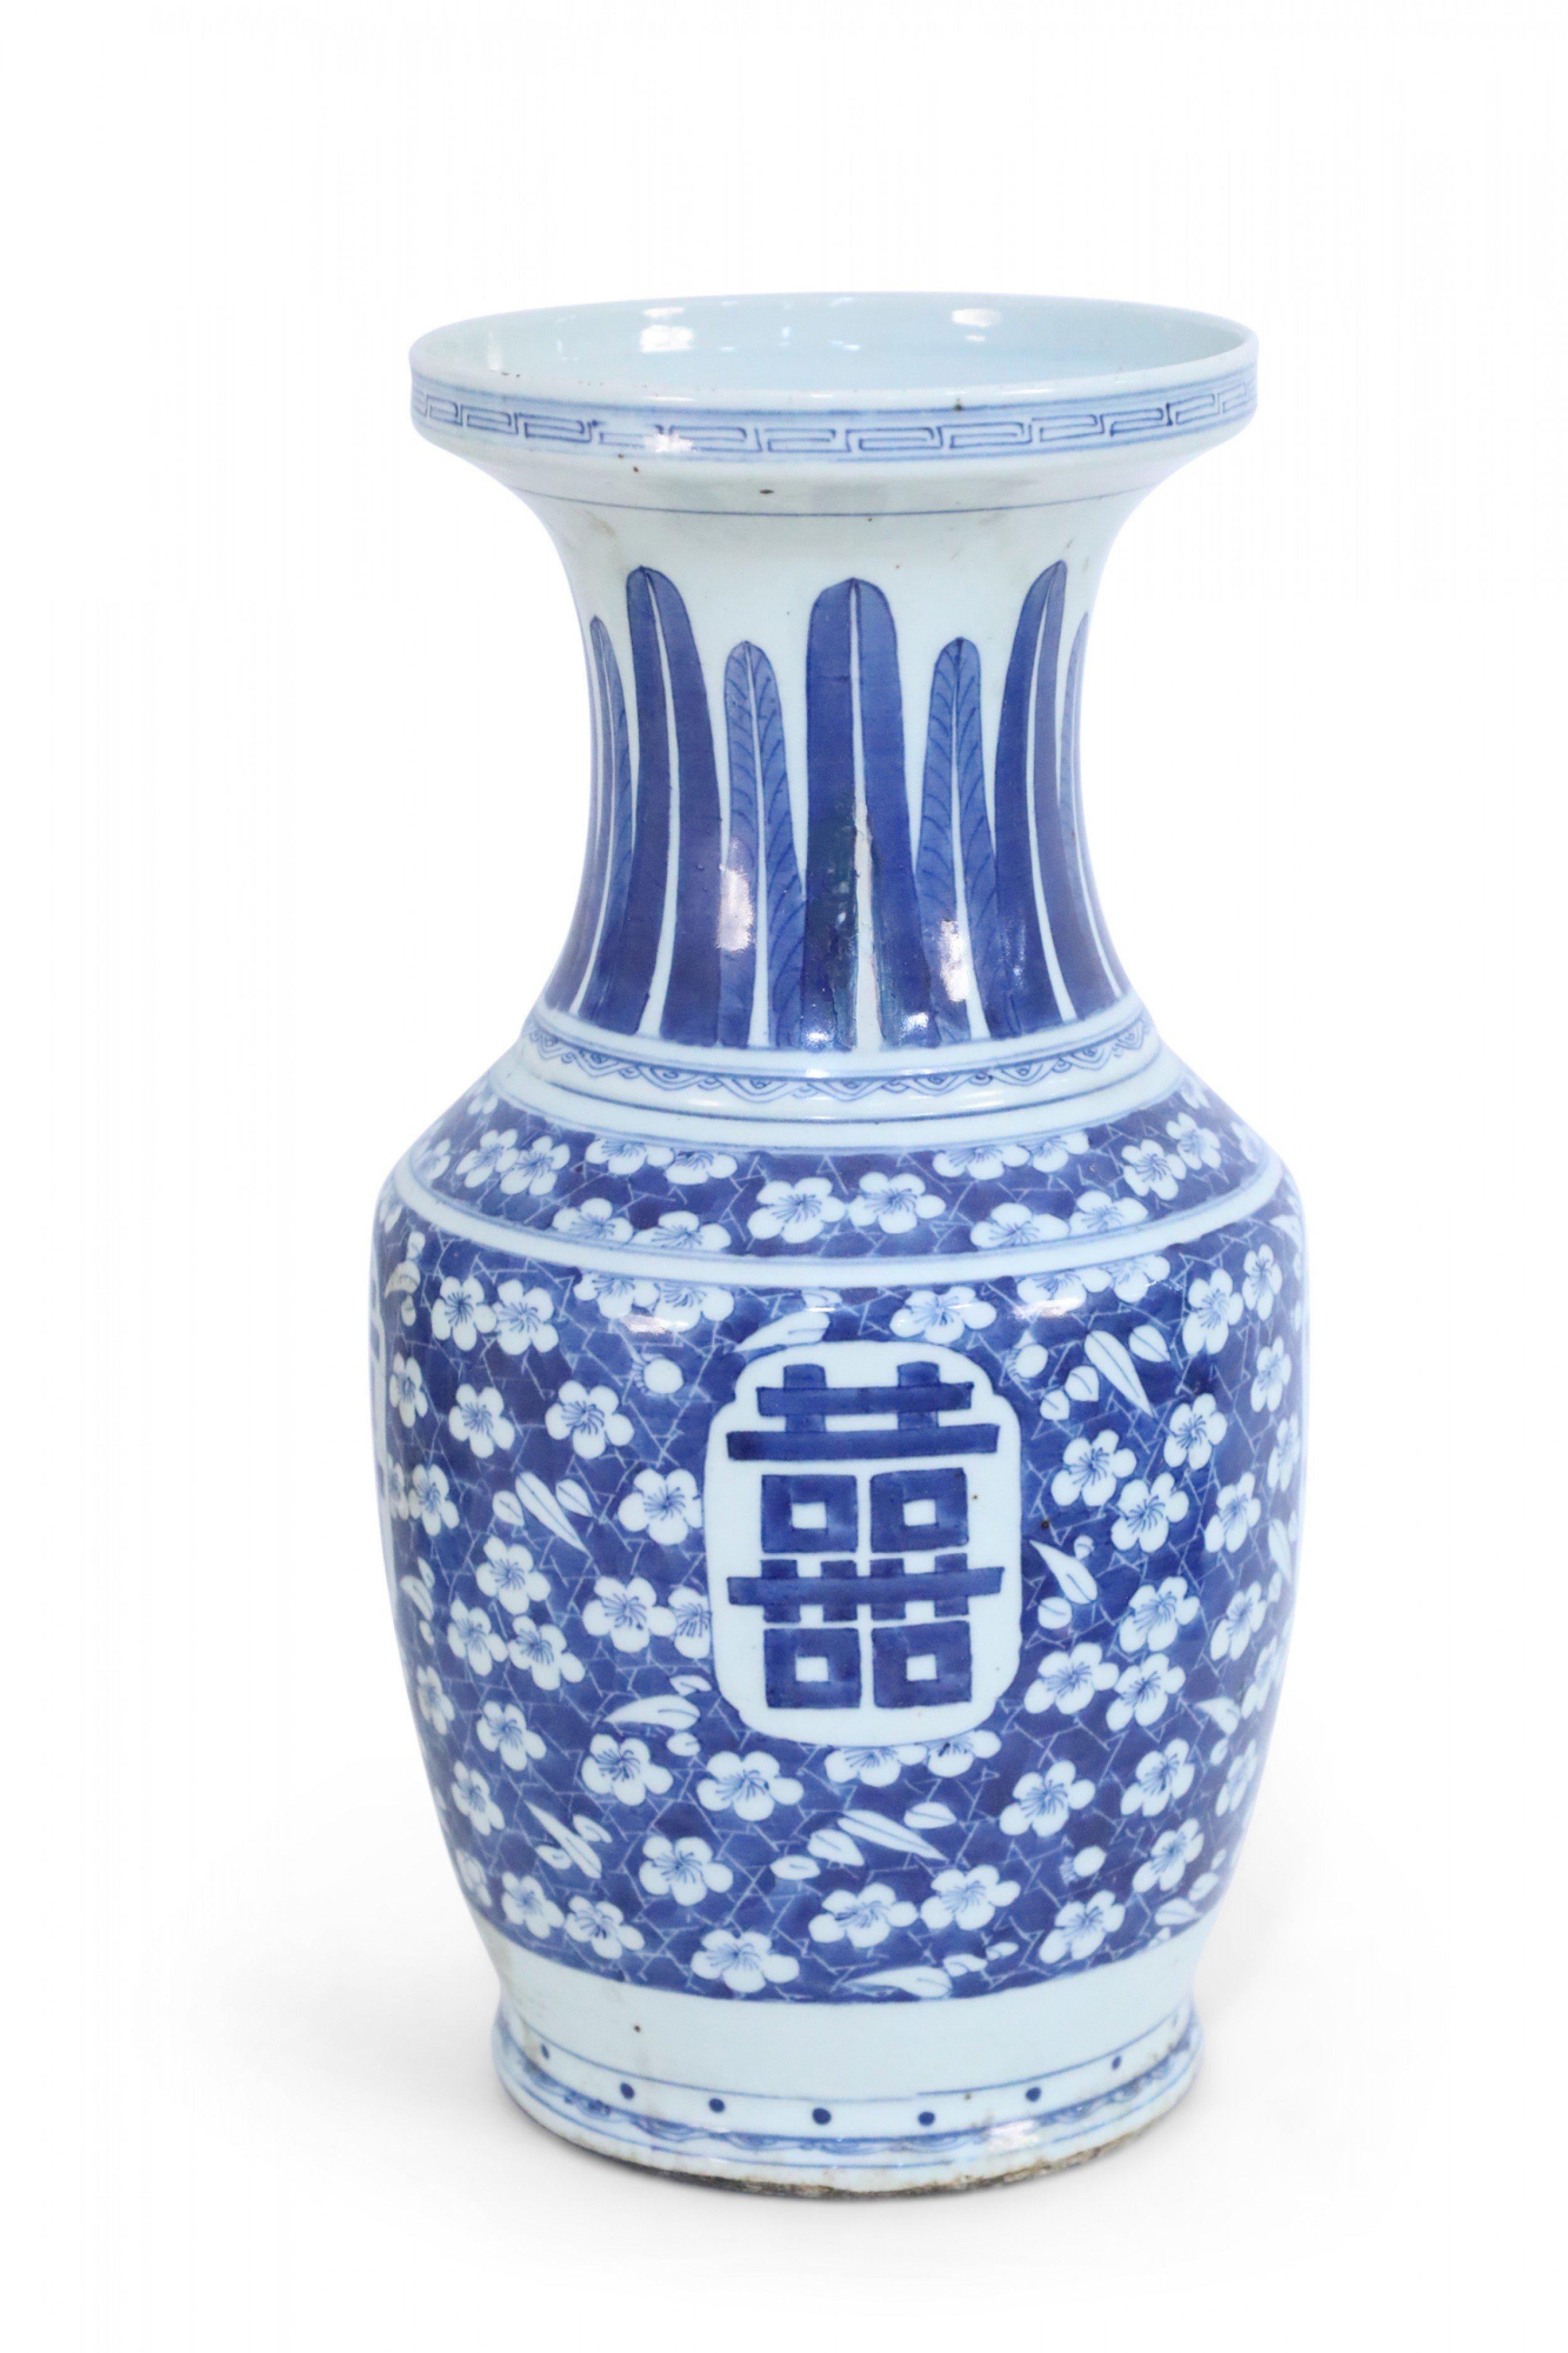 20th Century Chinese White and Blue Feather and Floral Motif Porcelain Urn For Sale